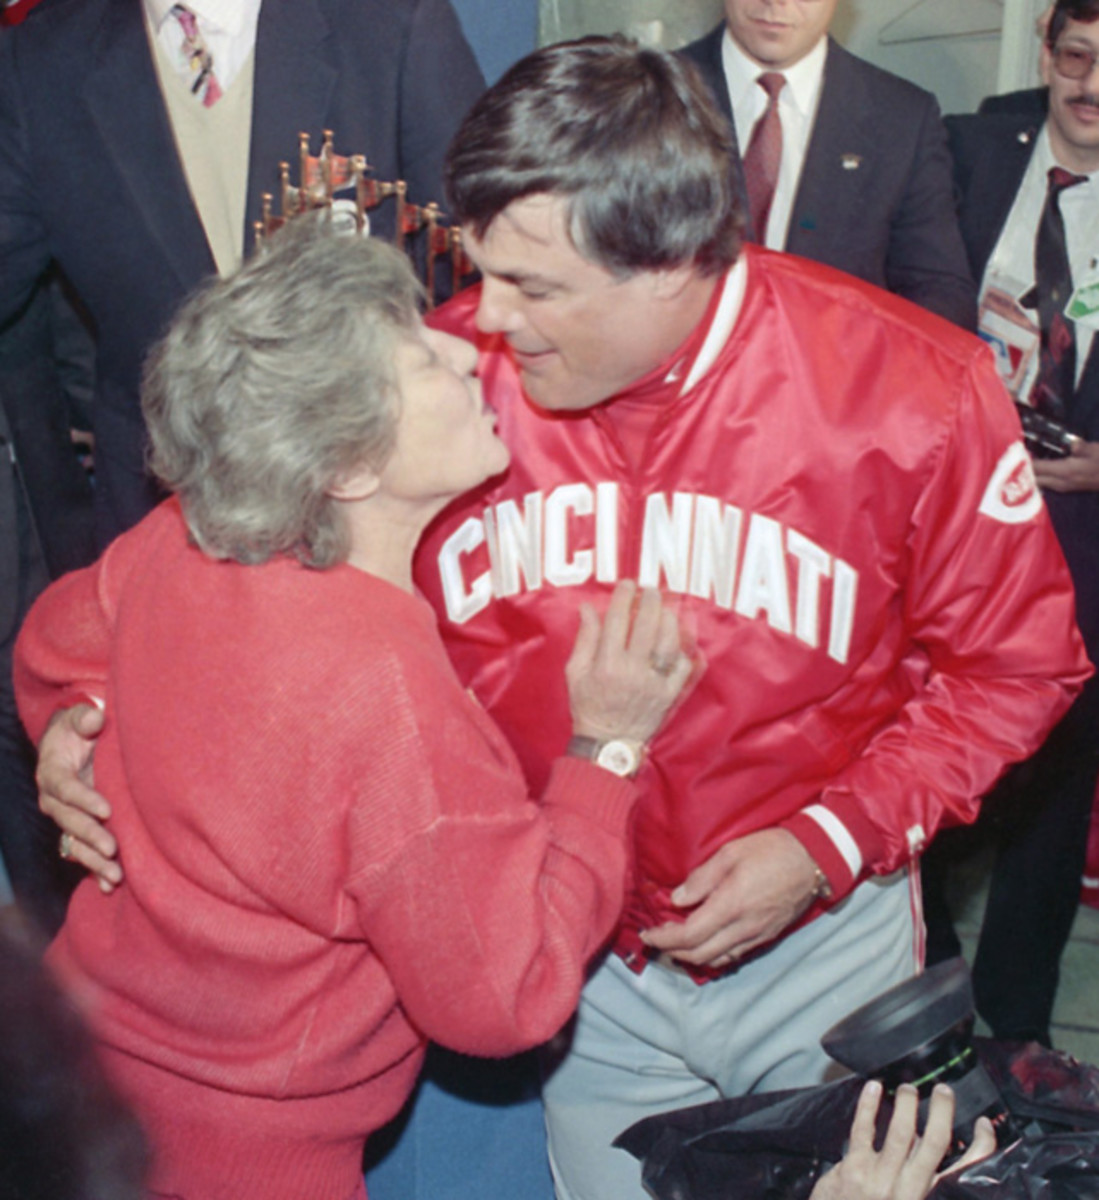  Marge Schott and Lou Piniella